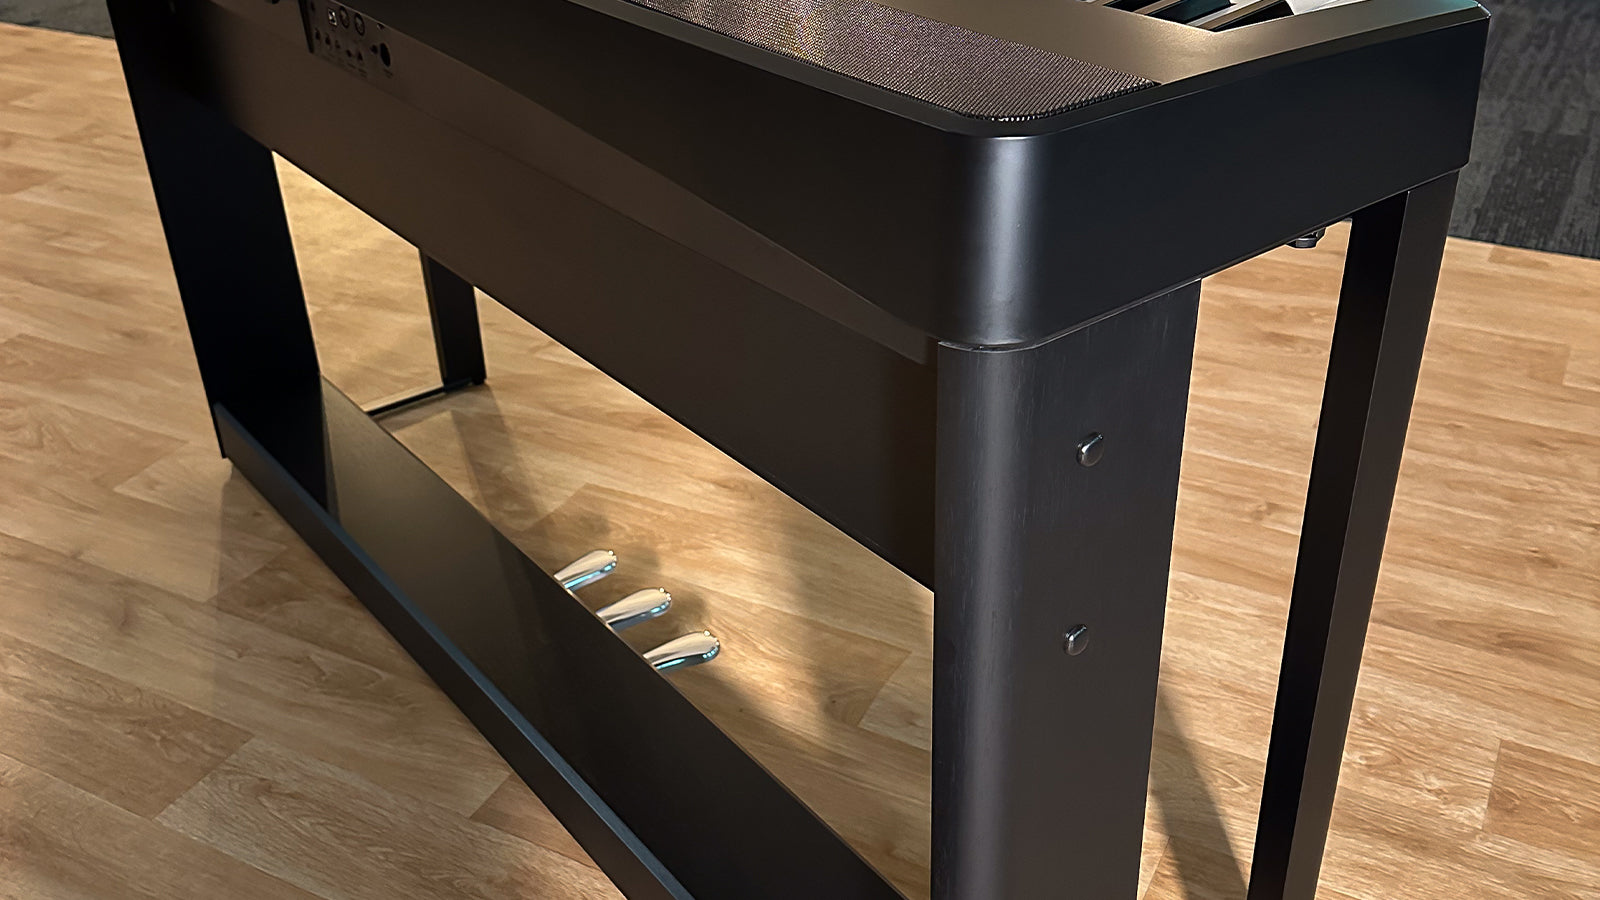 A Kawai piano on a stand in a studio